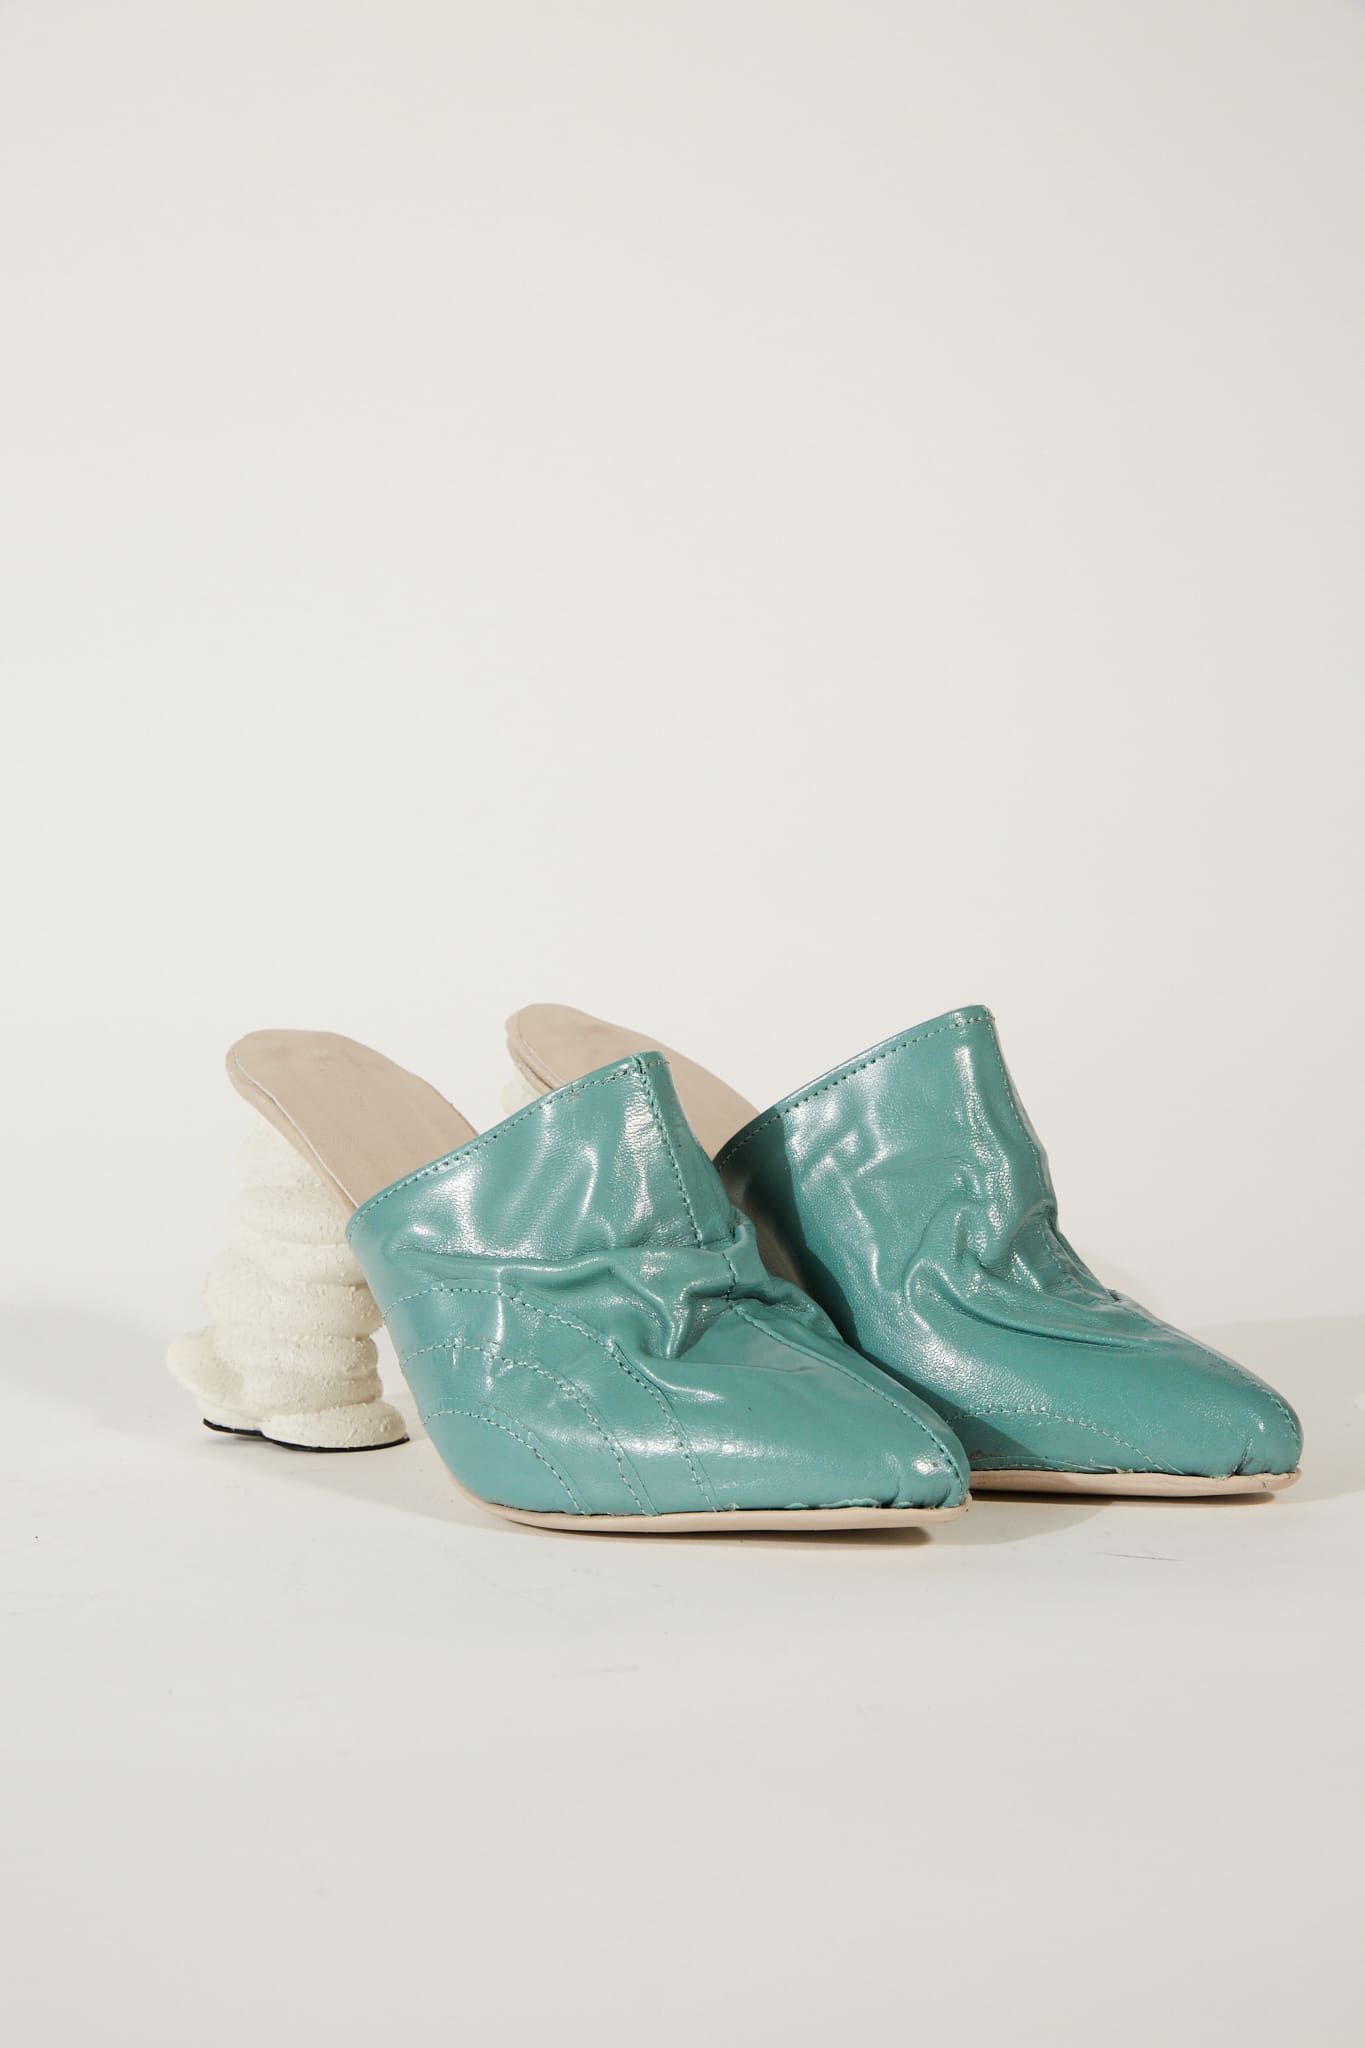 teal leather mules with white cloud heals